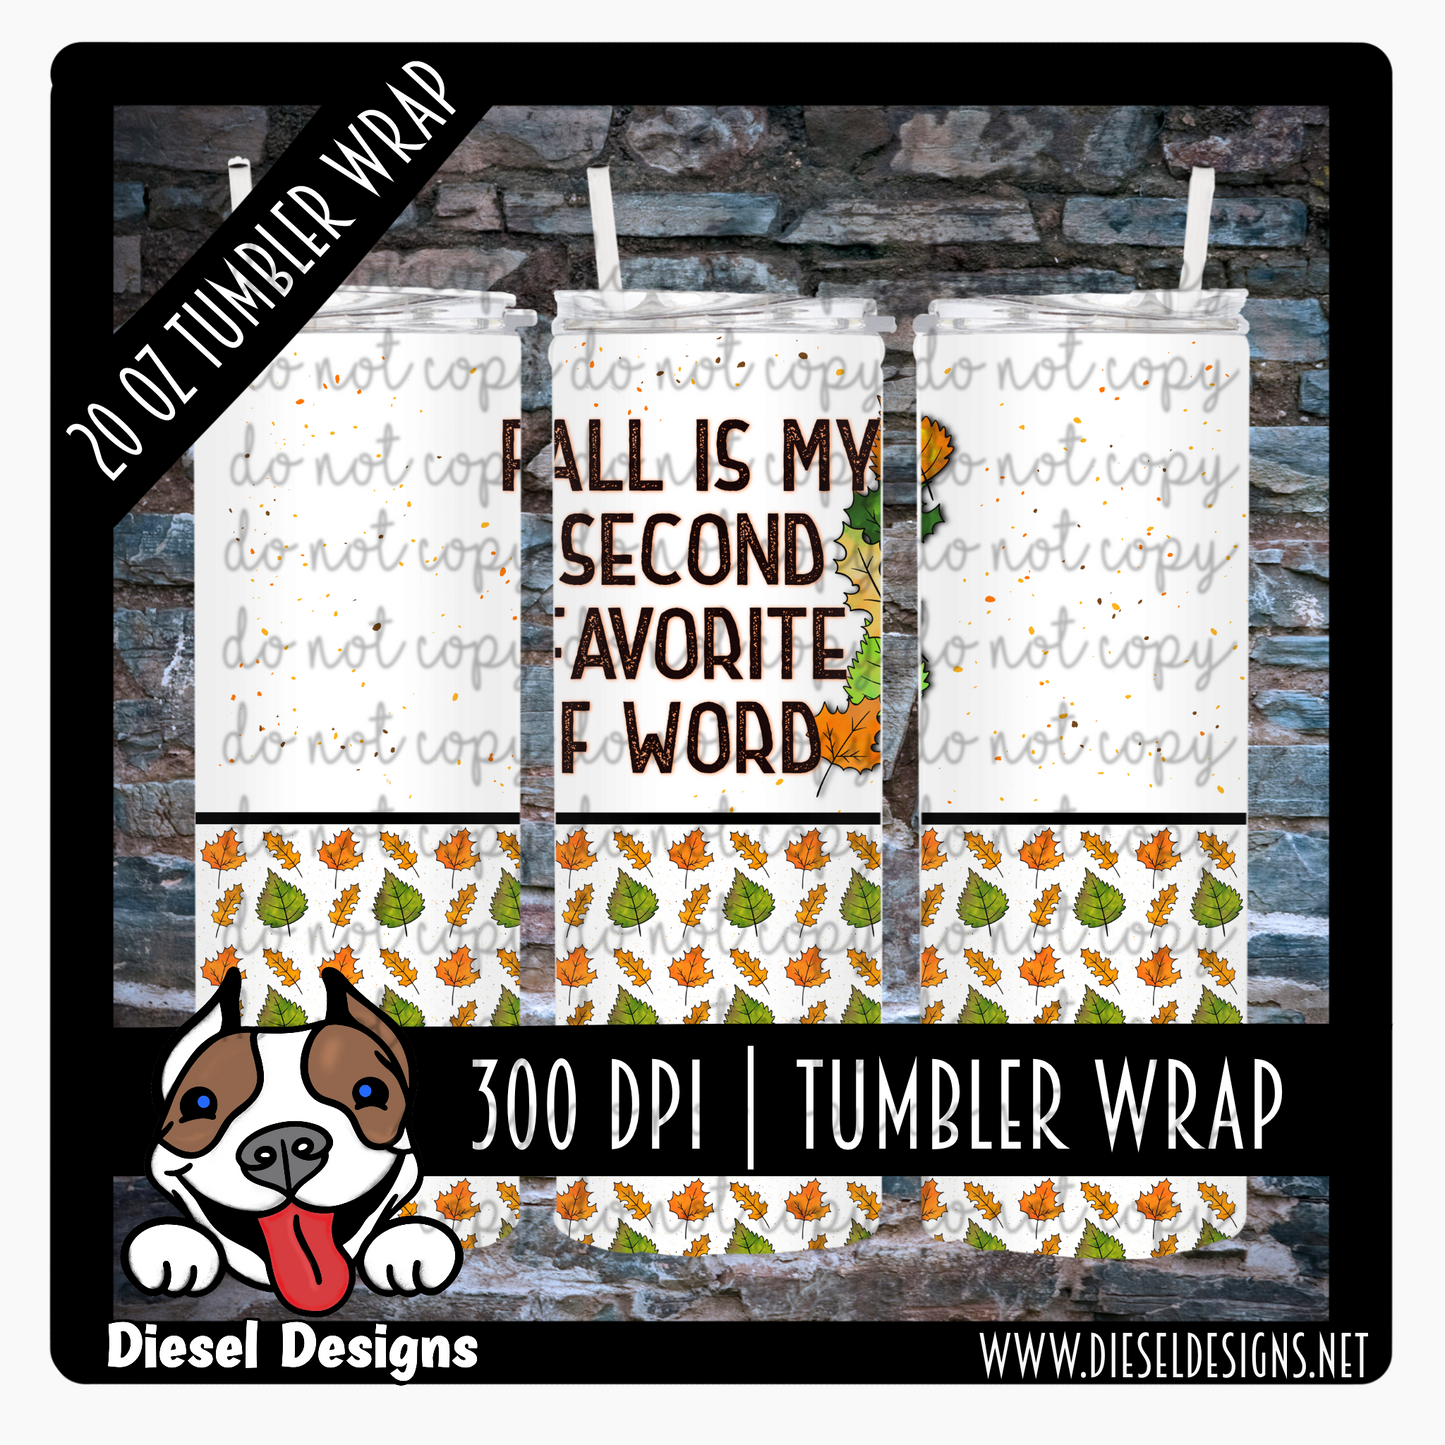 Fall is my 2nd favorite word Tumbler Wrap |